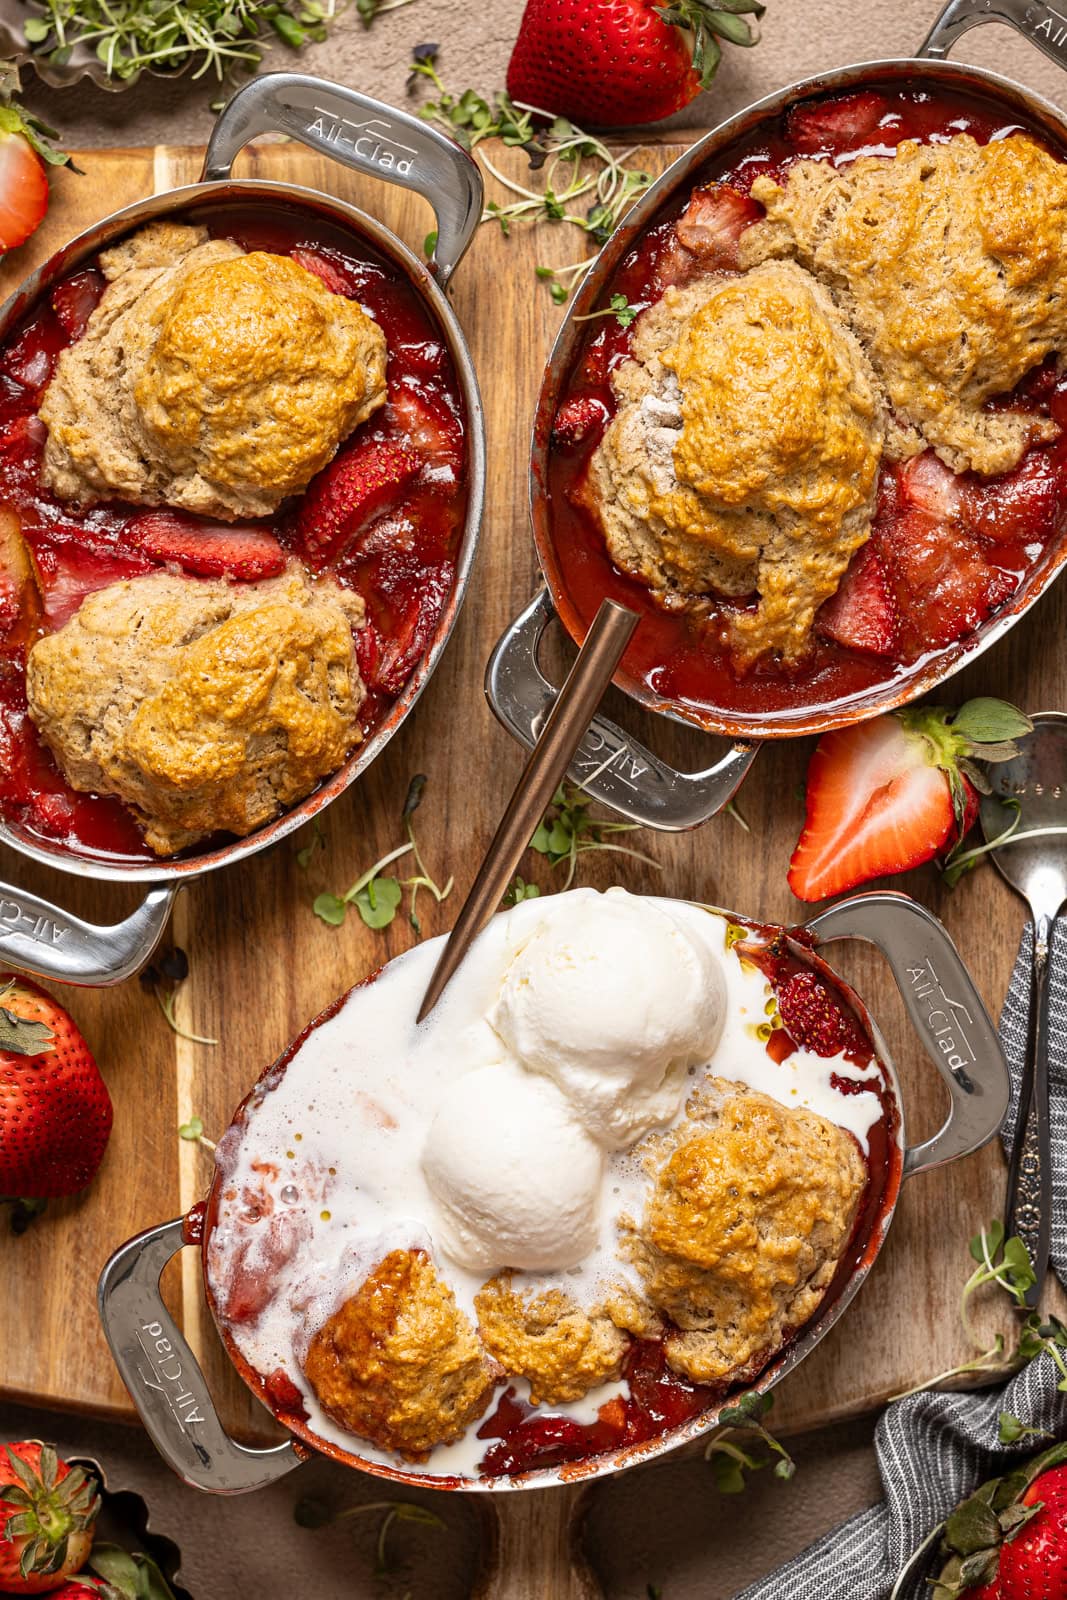 Three metal bakeware dishes with strawberry cobbler and a scoop of ice cream and spoons.